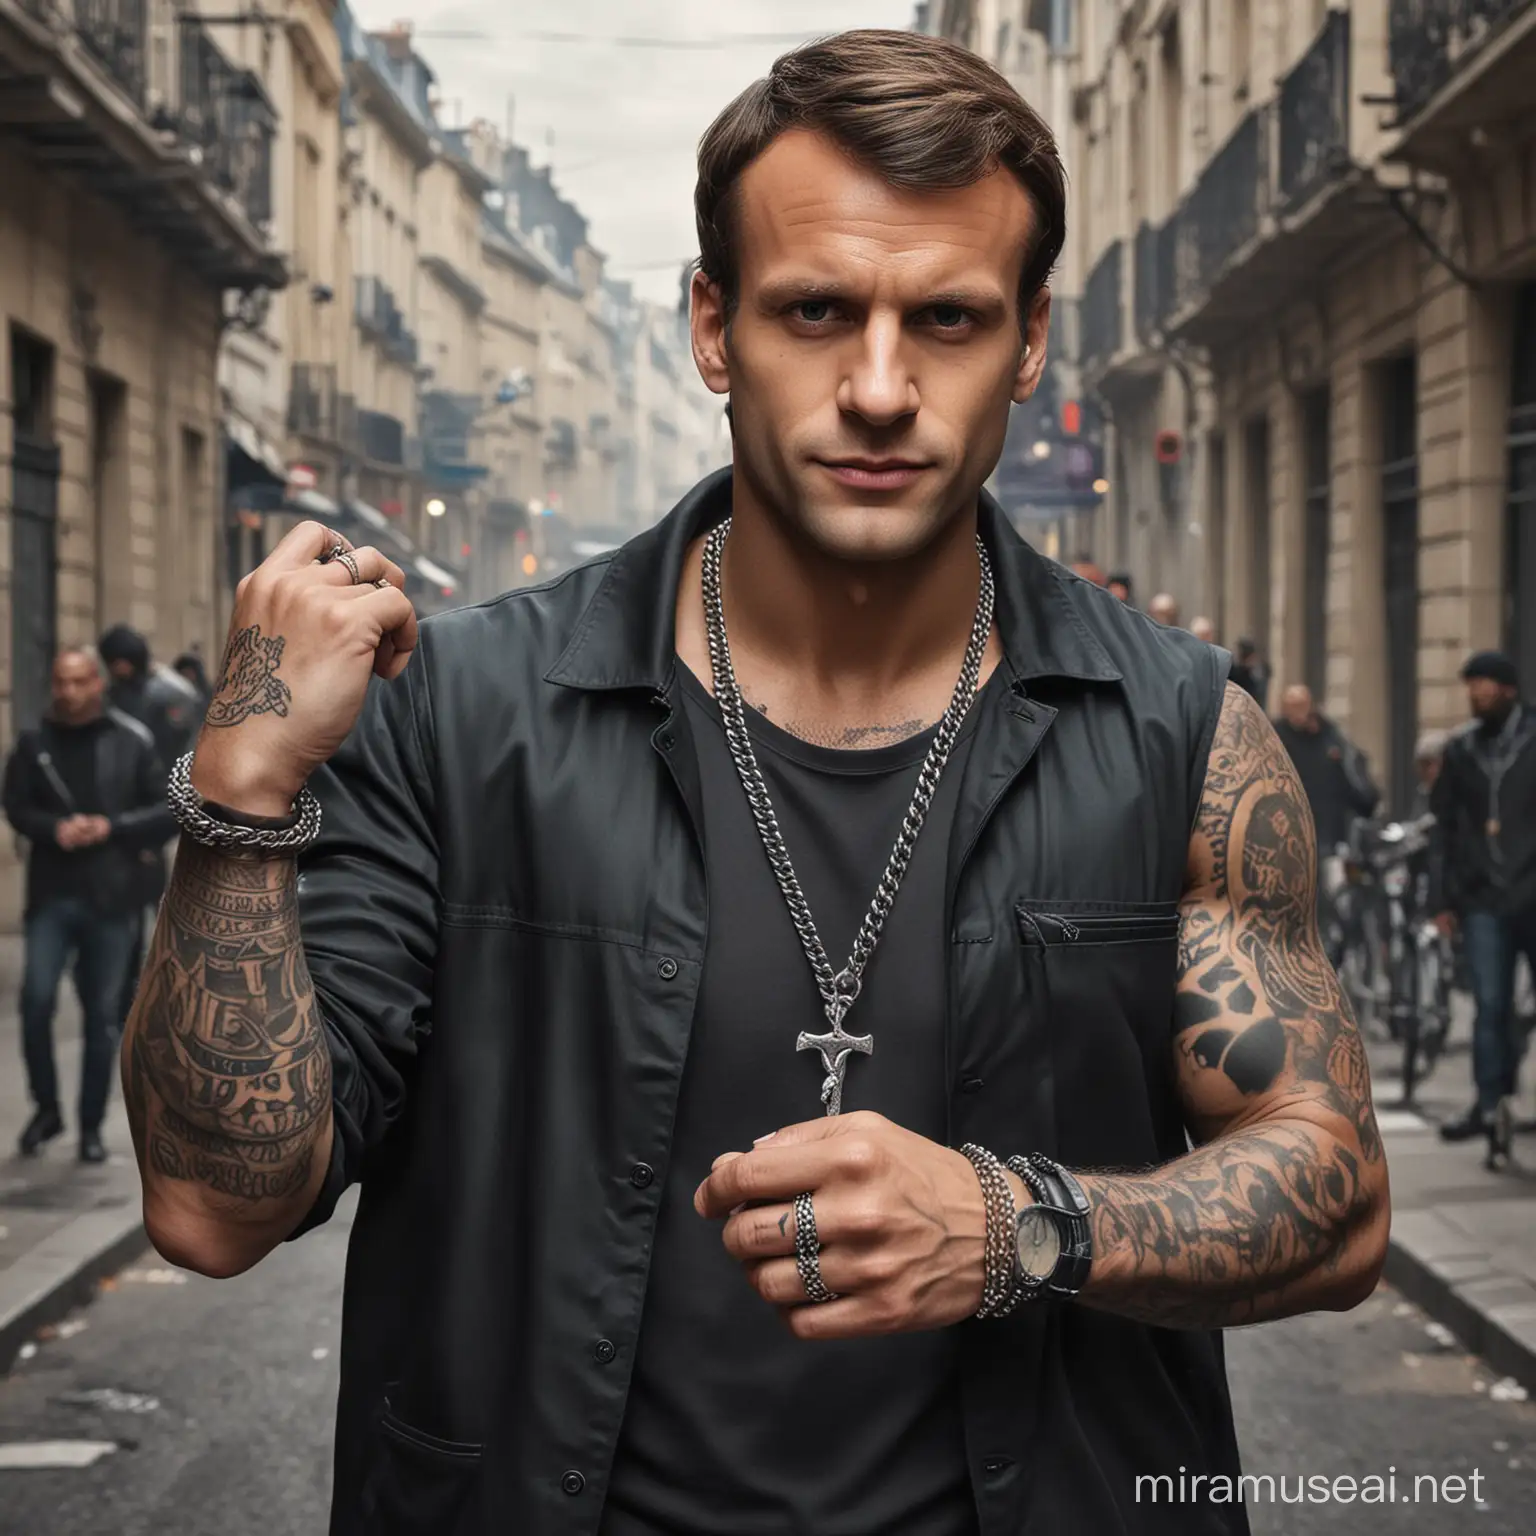 Macron as a street gang member.He has tatto and chain in his hand.Meke it realistic and add some other gang mebmers